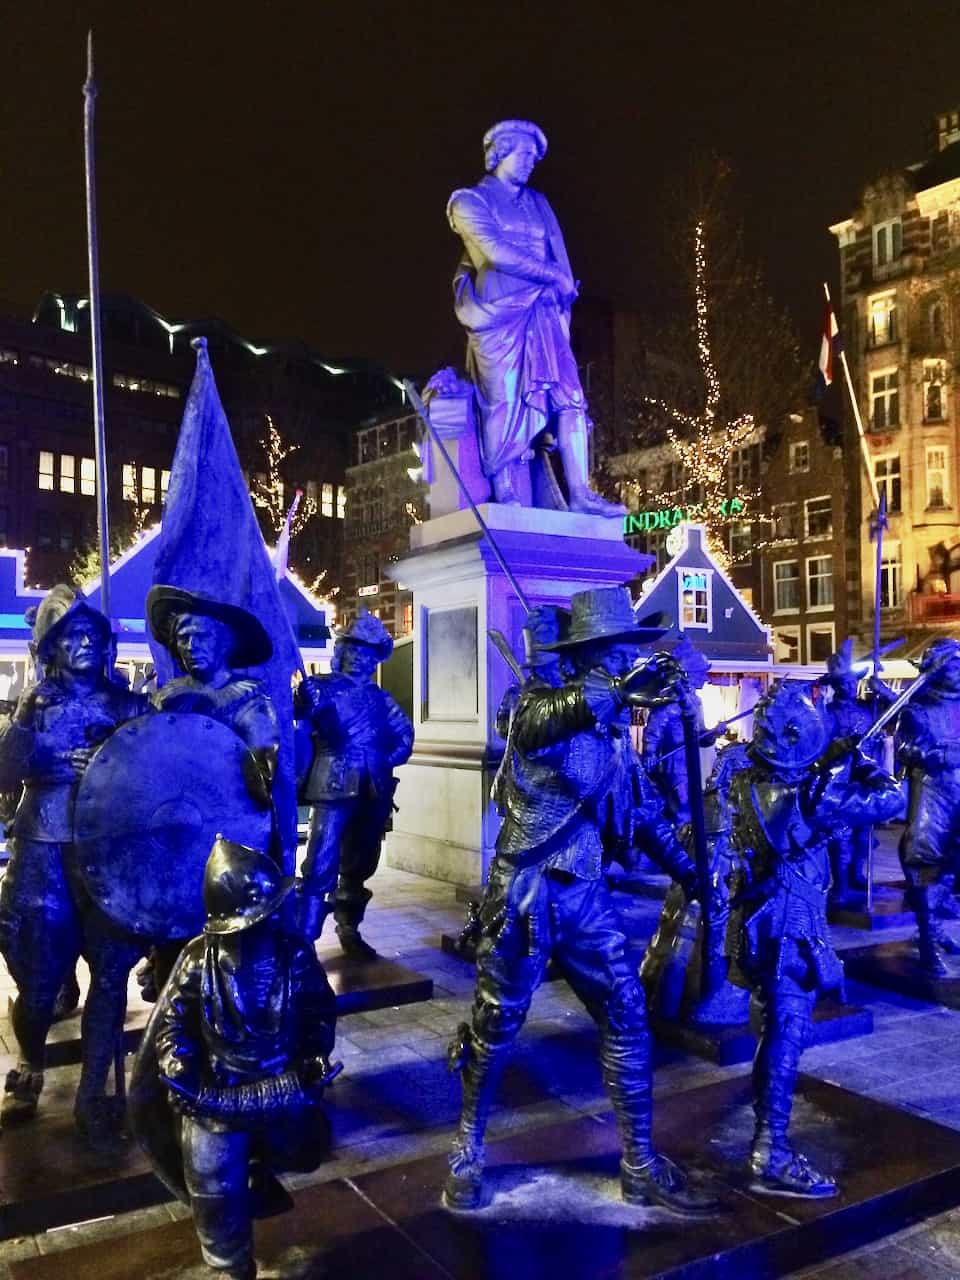 rembrandt-square-night-watch-statues-photo